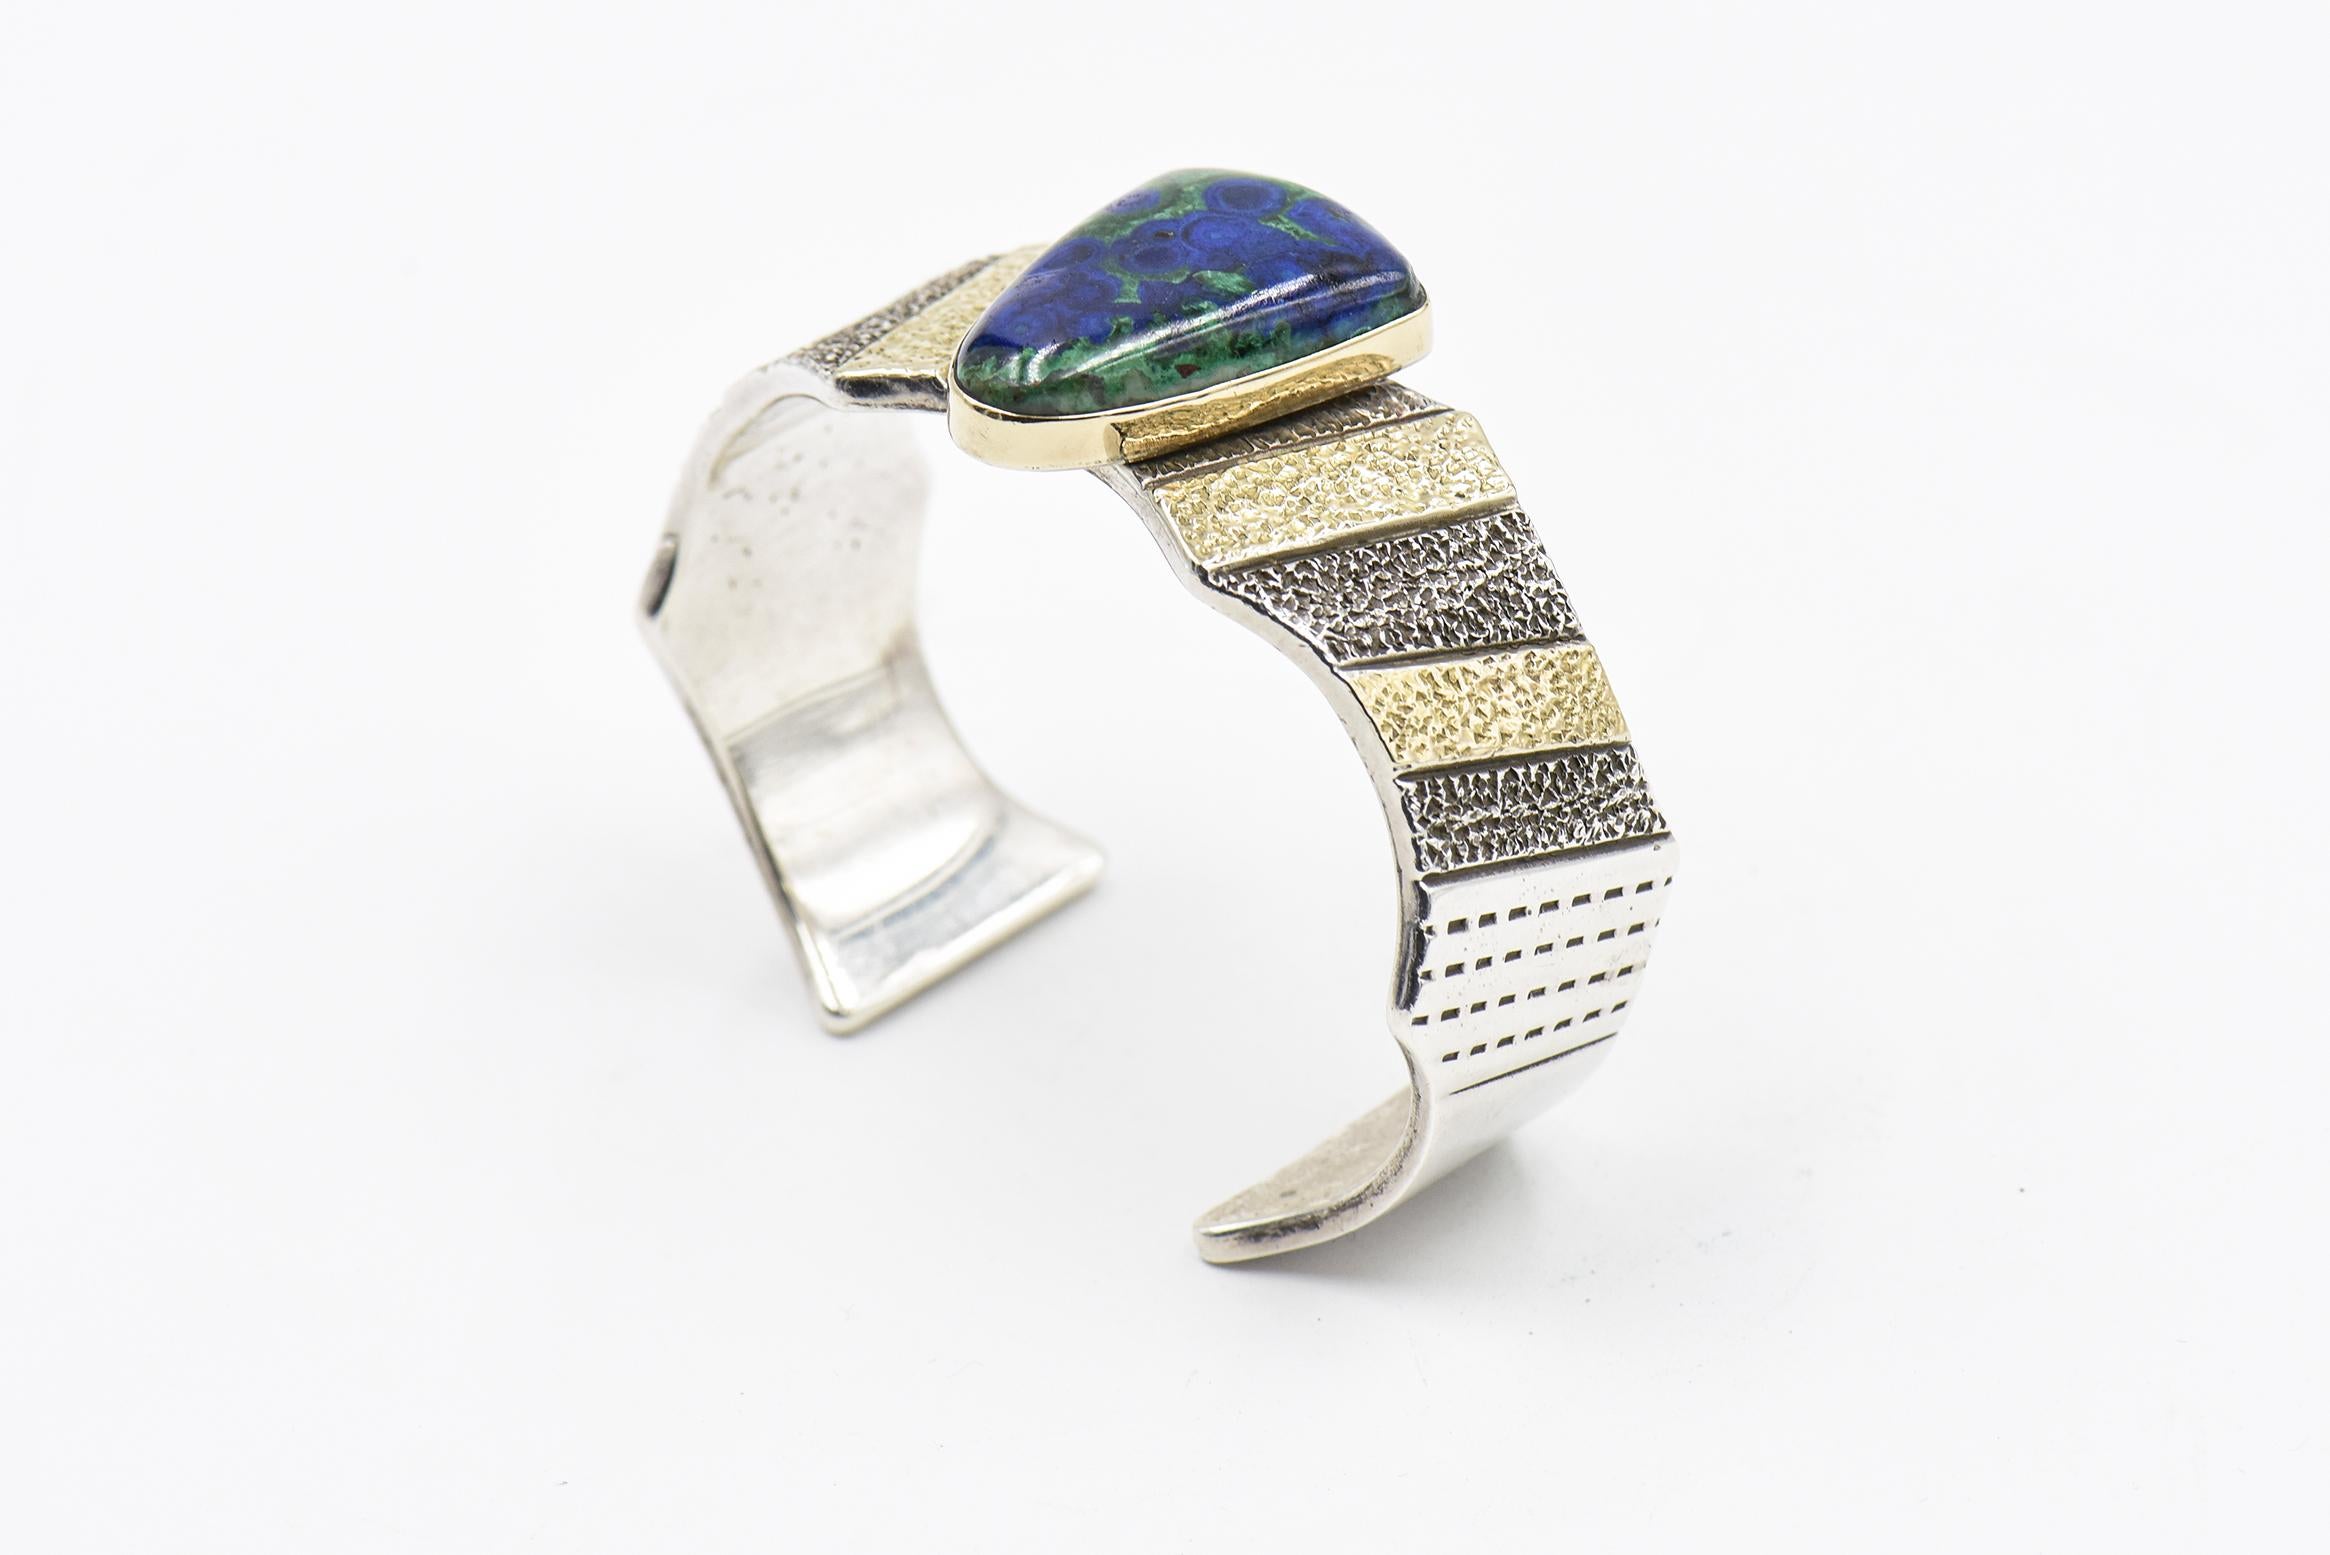 Stunning bracelet designed by Marc Antia featuring a centrally set triangular azurite malachite set in a textured 14k gold and sterling silver cuff bracelet with hand stamped designs in the metal. 

6.5